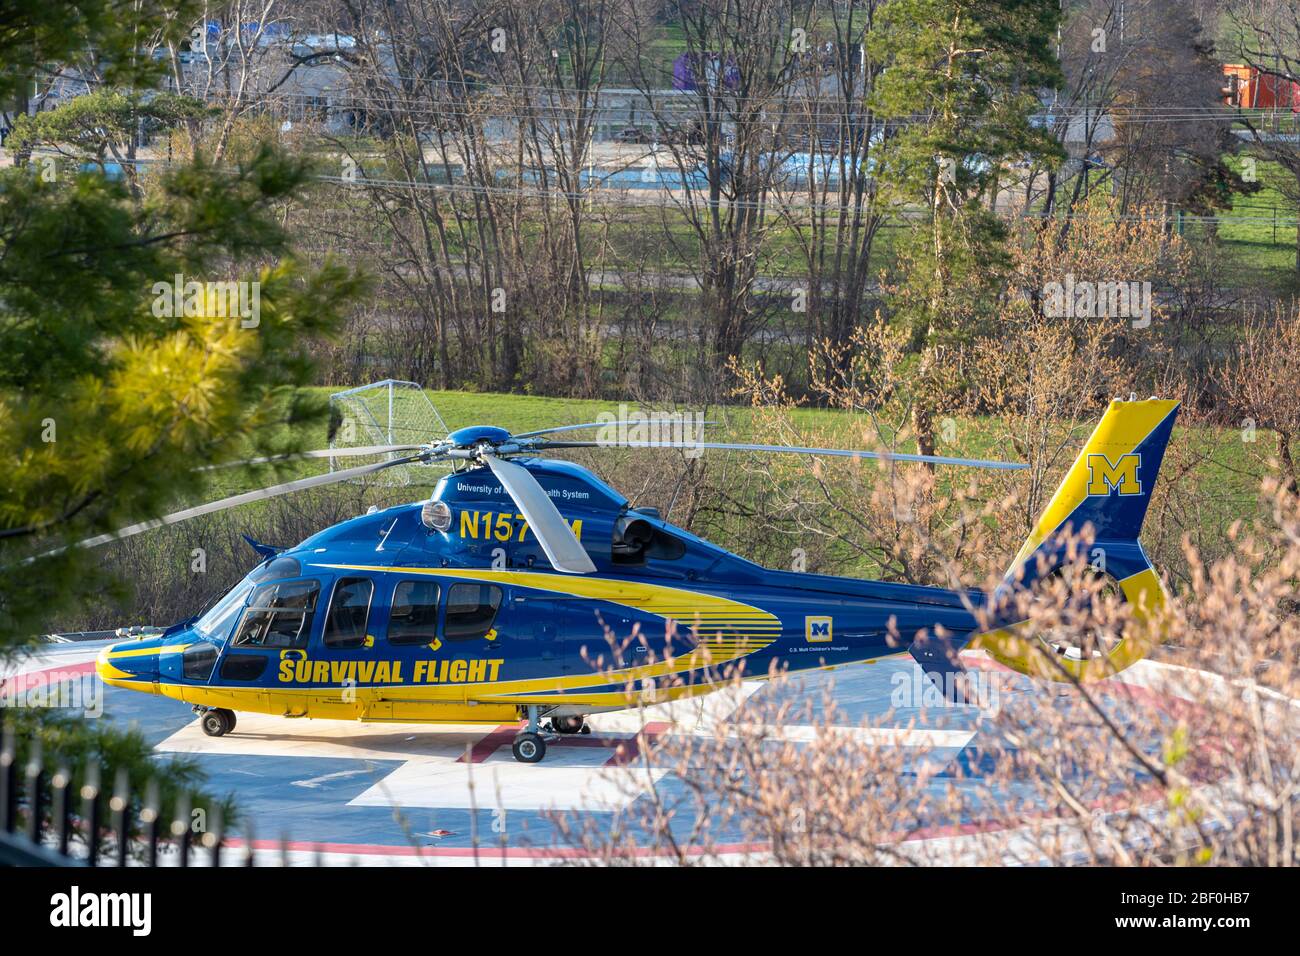 Ann Arbor, Michigan - A University of Michigan Health System air amulance helicopter on a helipad at the university's Medical Center. Stock Photo